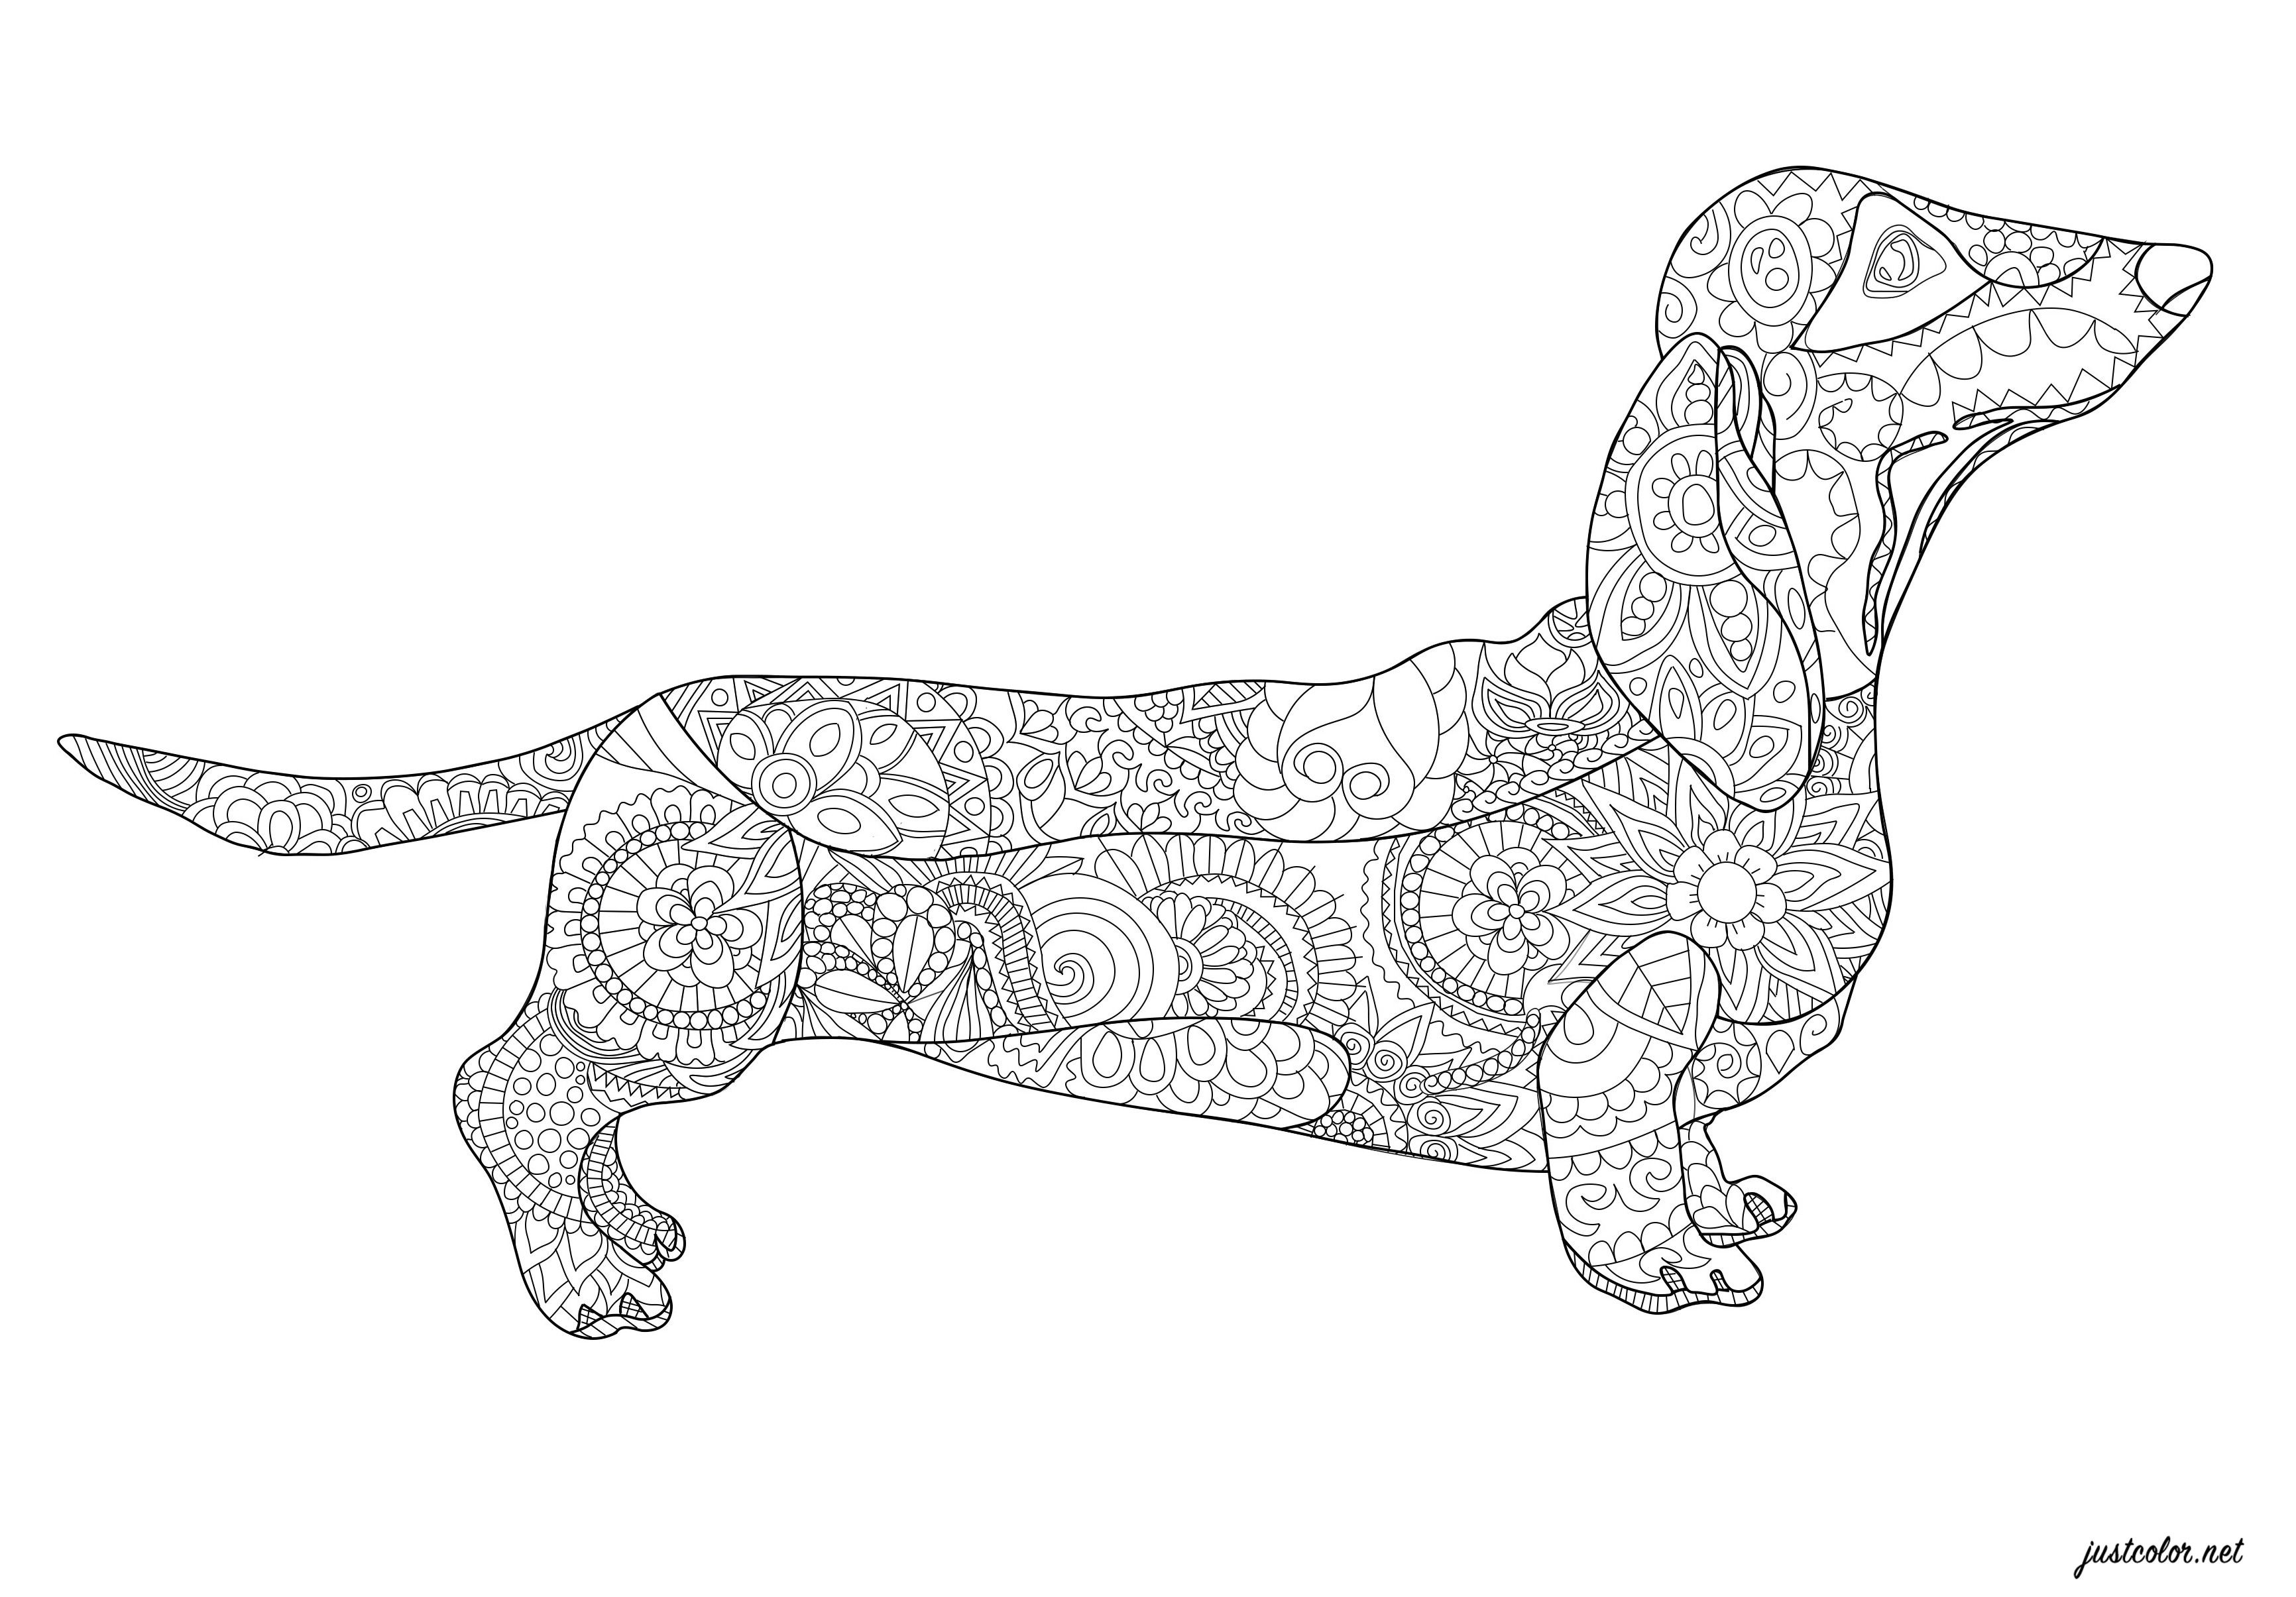 Dachshund - Dogs Adult Coloring Pages